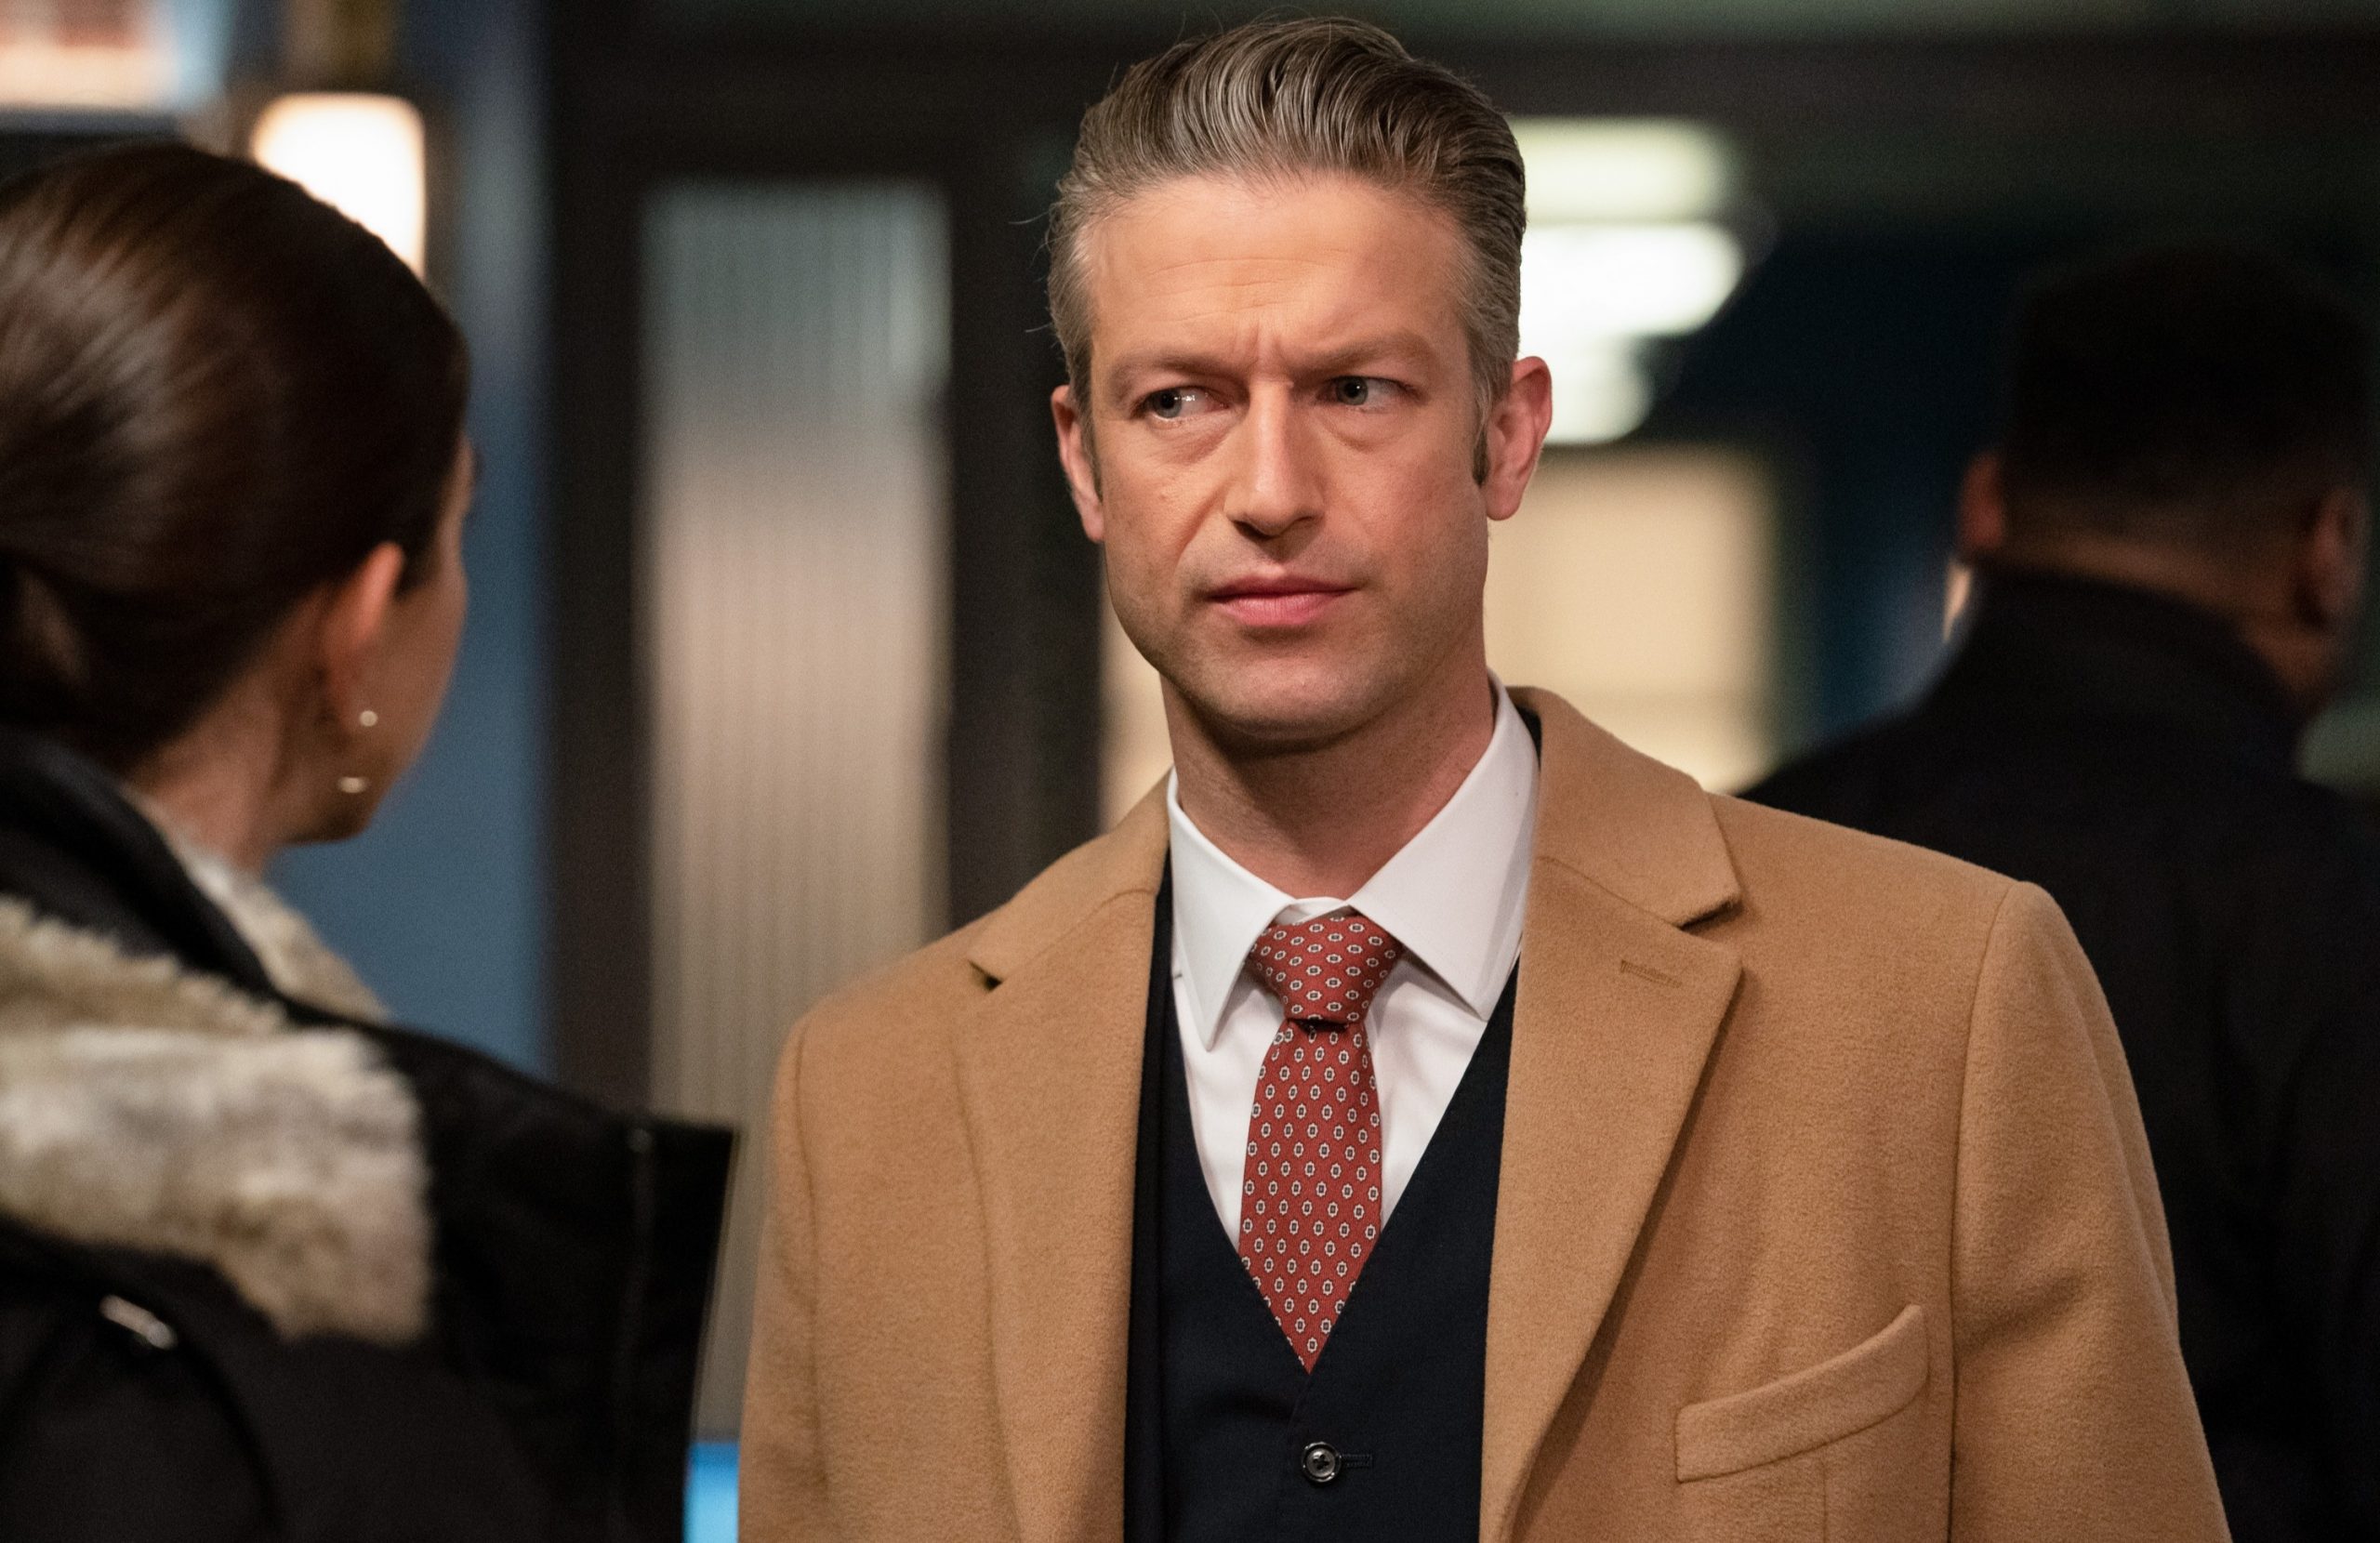 Who does Peter Scanavino play on Law and Order?